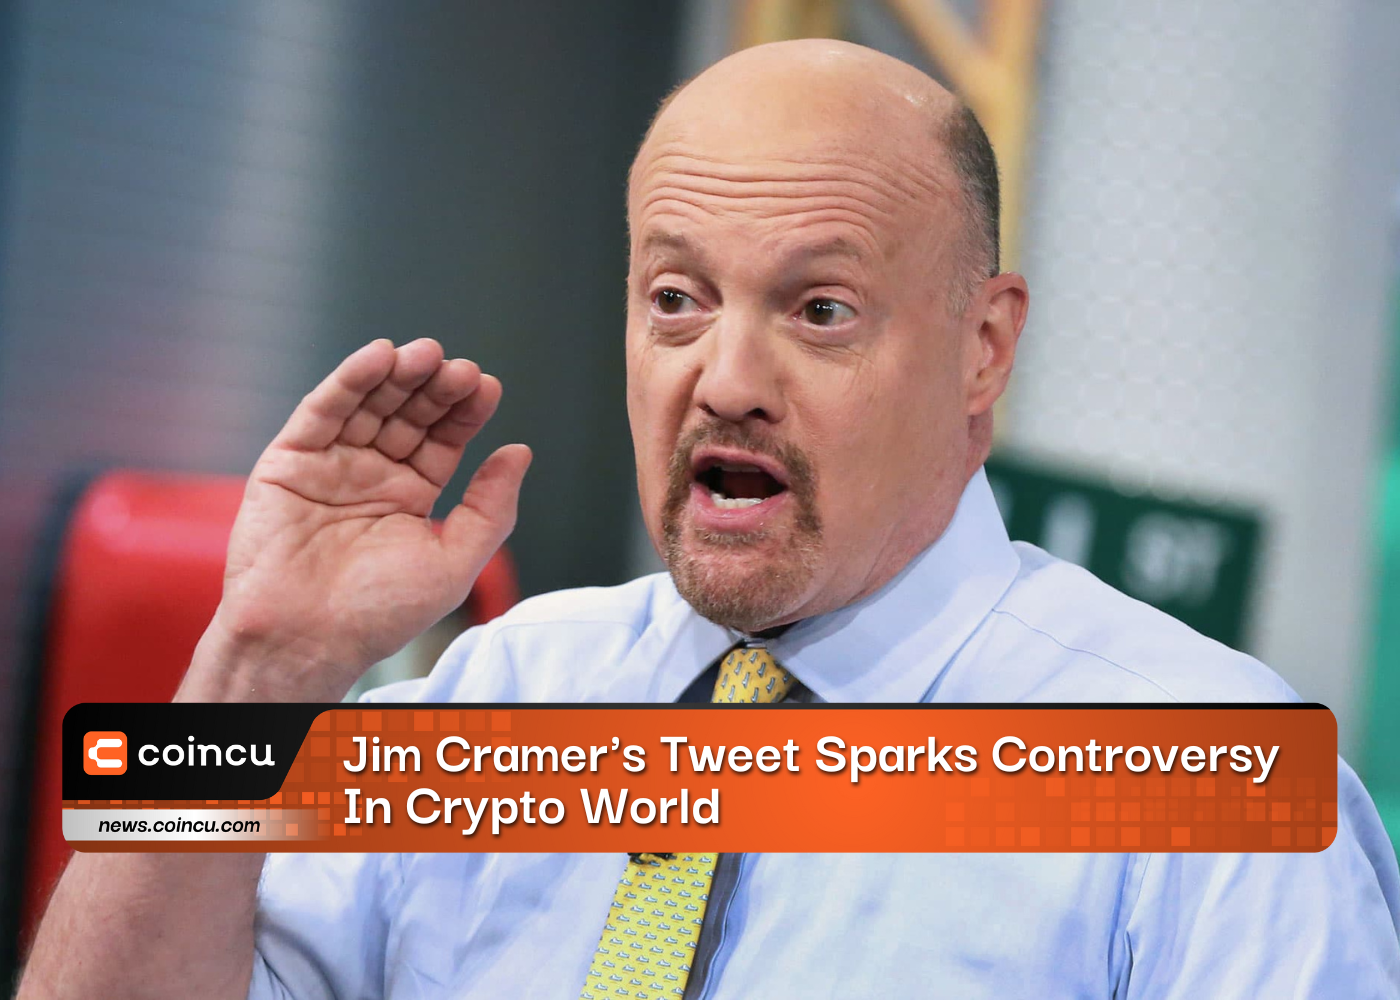 Jim Cramers Tweet Sparks Controversy